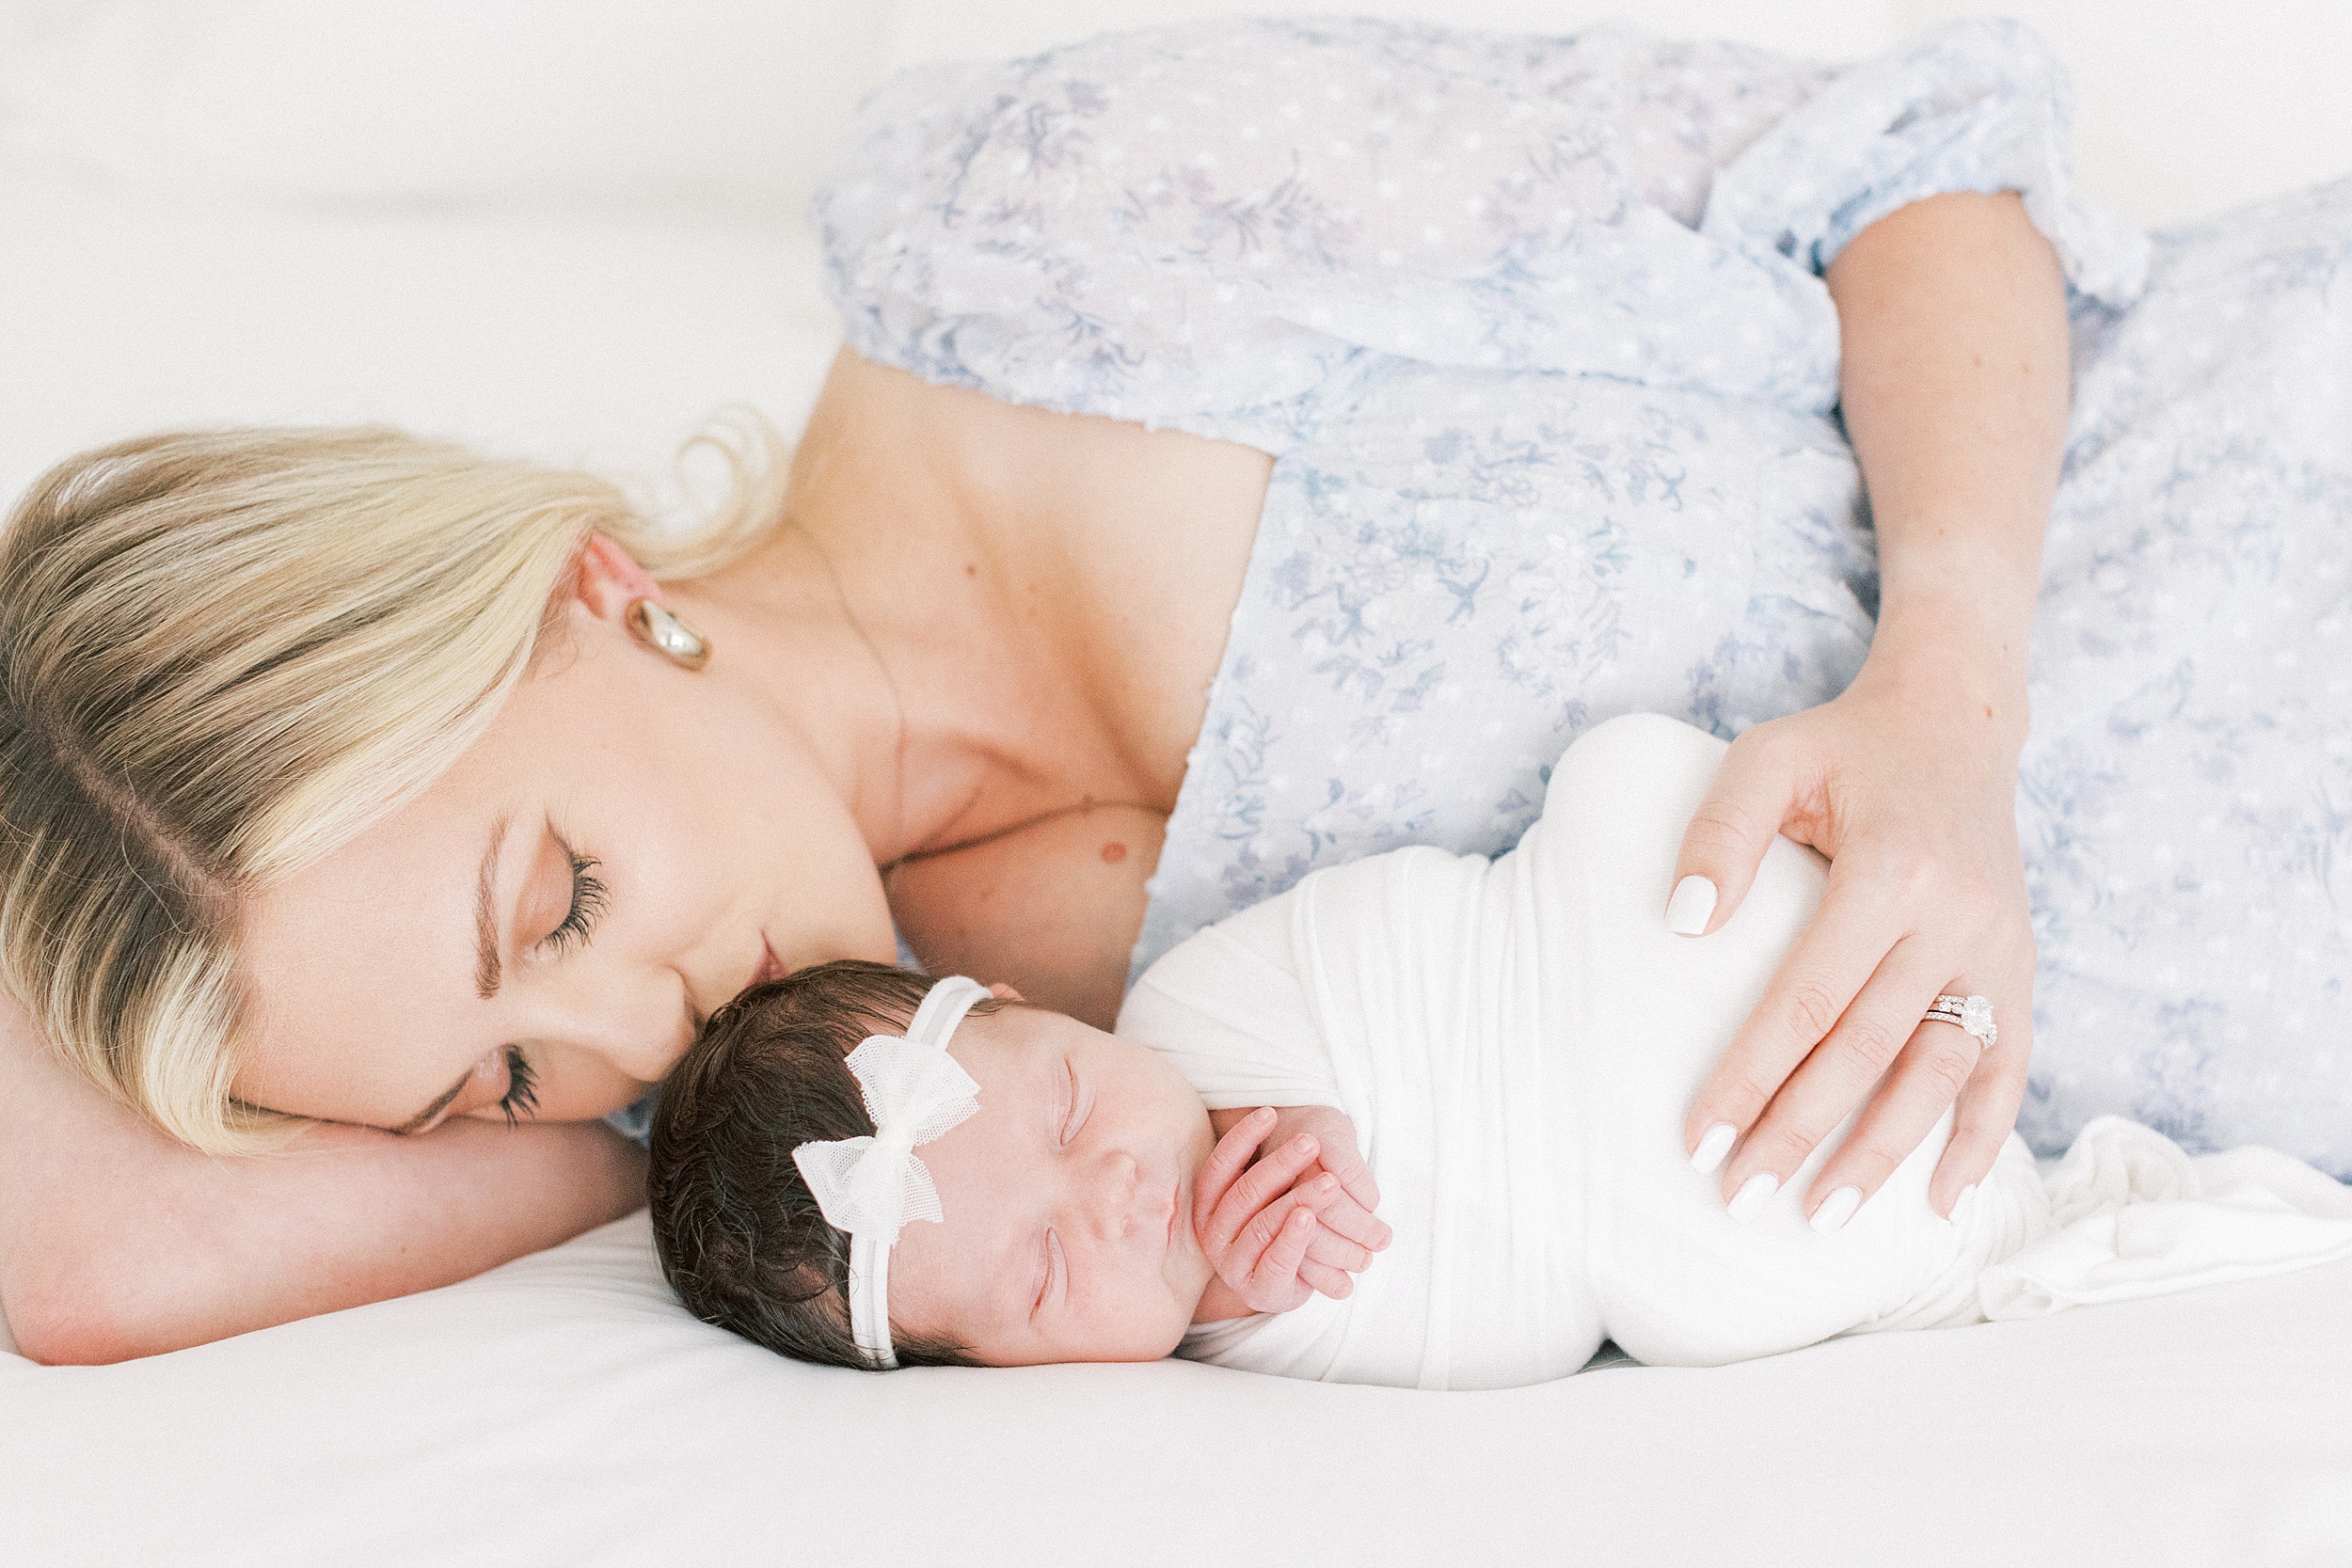 A new mom lays on a bed in a blue dress snuggling and kissing her sleeping newborn baby in a white bow with the help of Dallas postpartum support